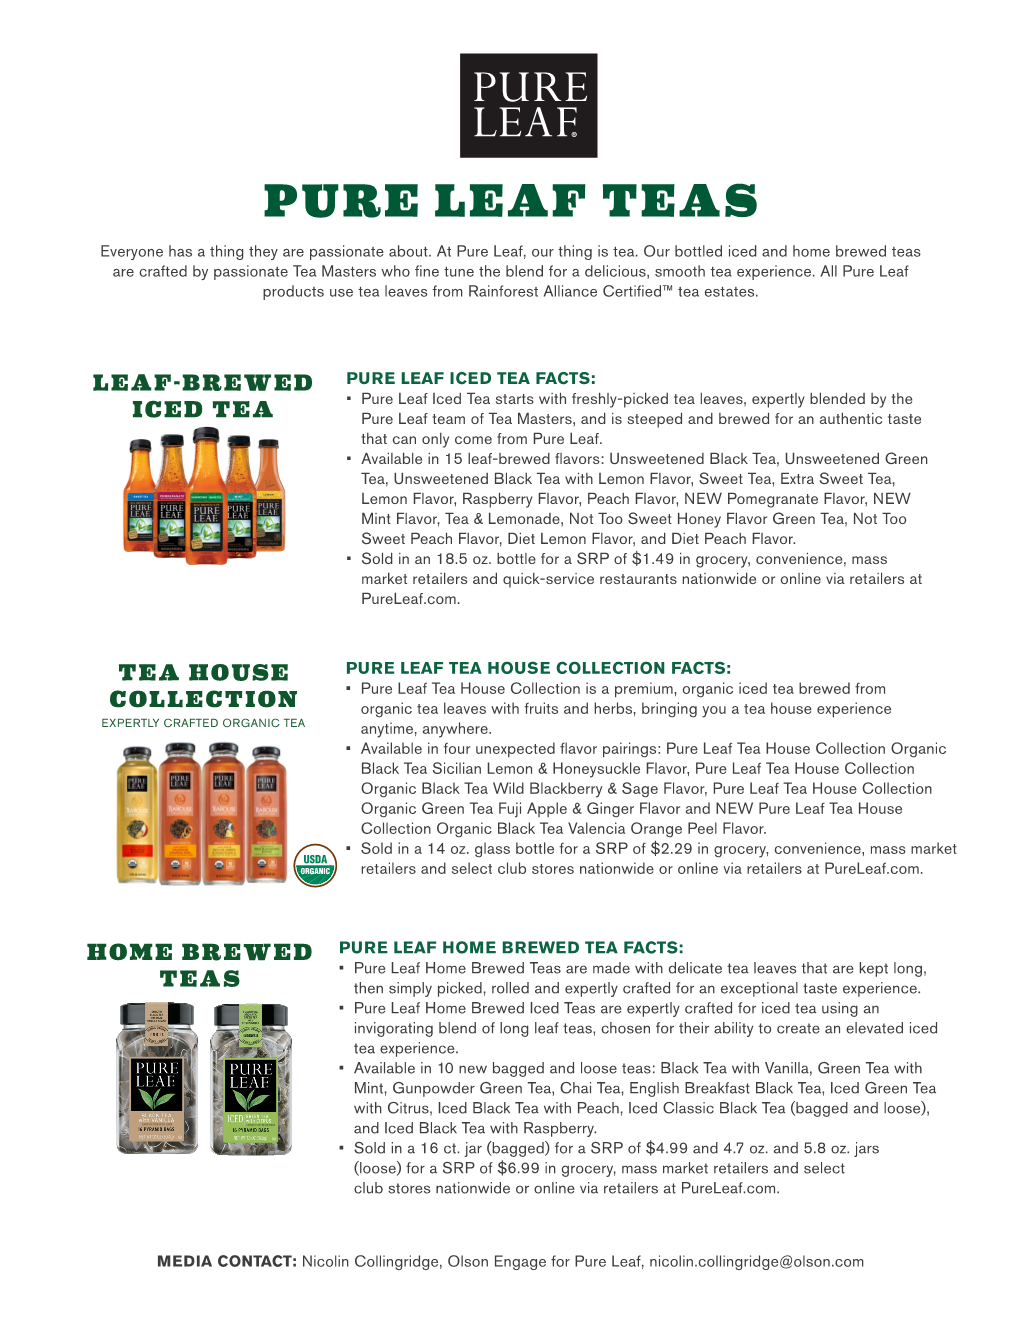 PURE LEAF TEAS Everyone Has a Thing They Are Passionate About